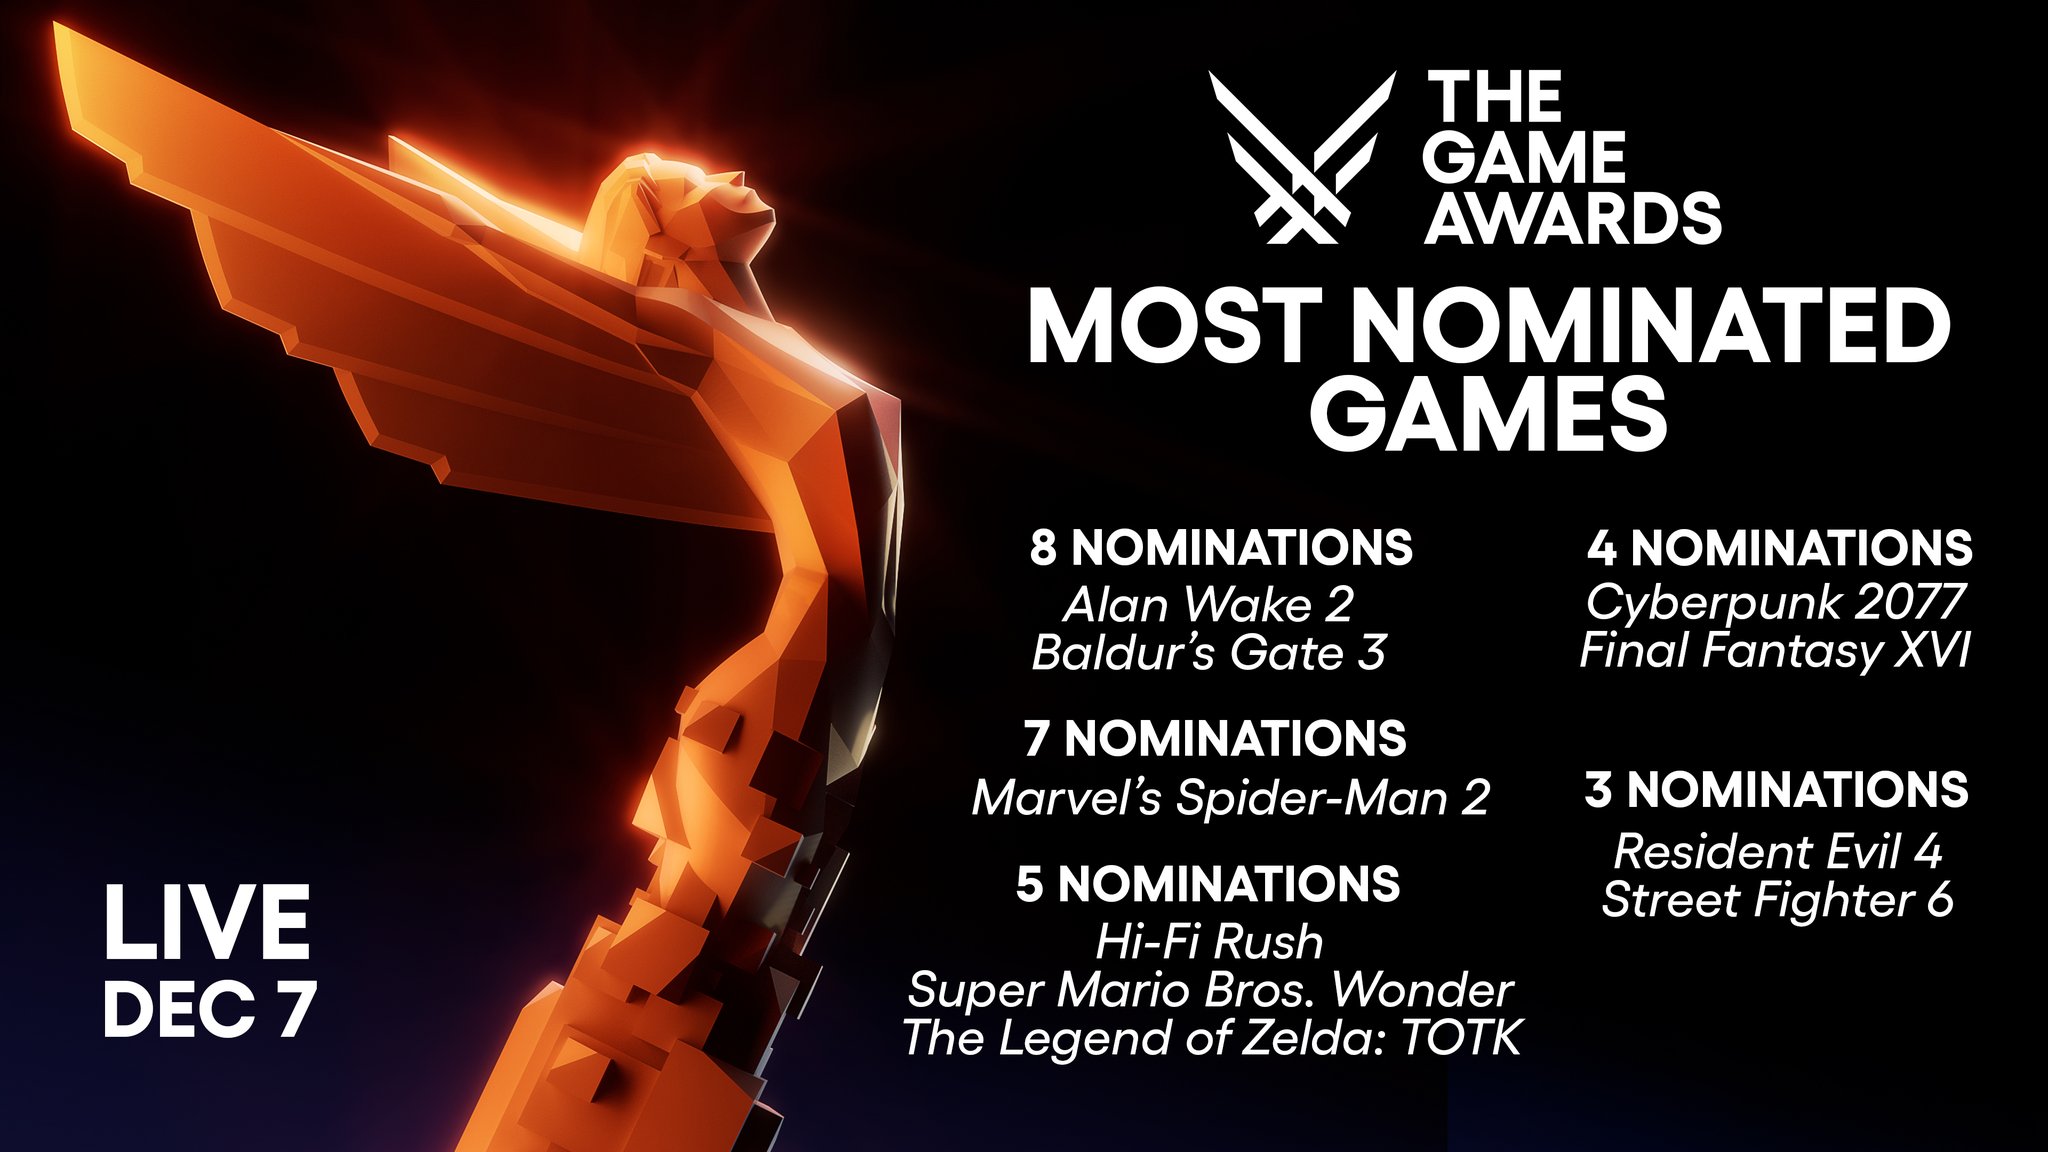 Mobile games shouldn't be at The Game Awards